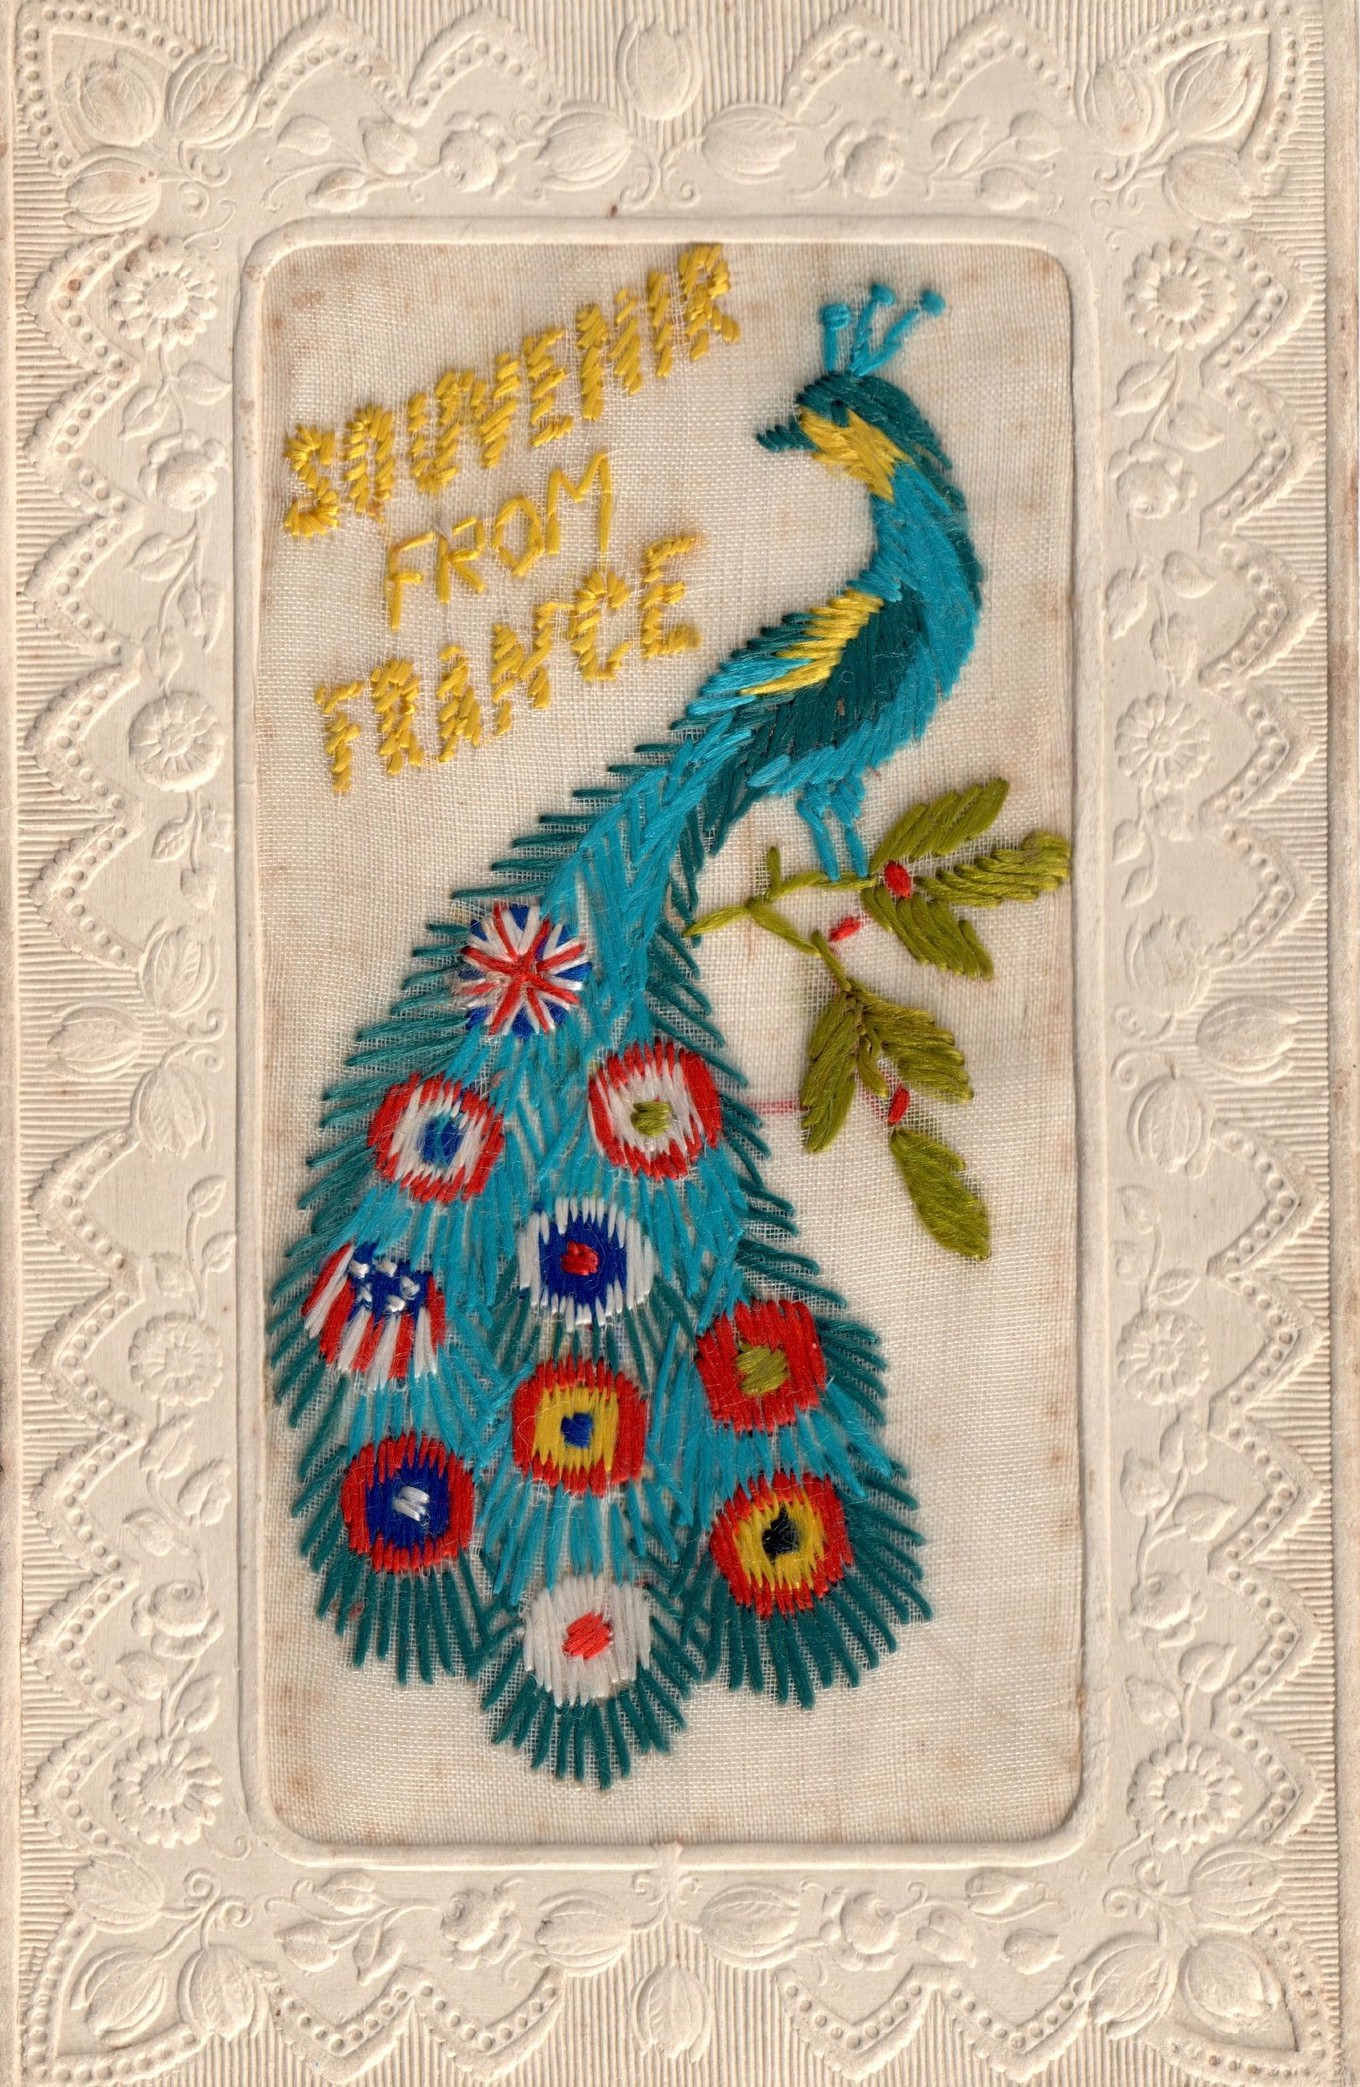 Embroidered postcard from the First World War, with the flags of the Allies depicted on the feathers of a peacock (TRC 2015.0434).